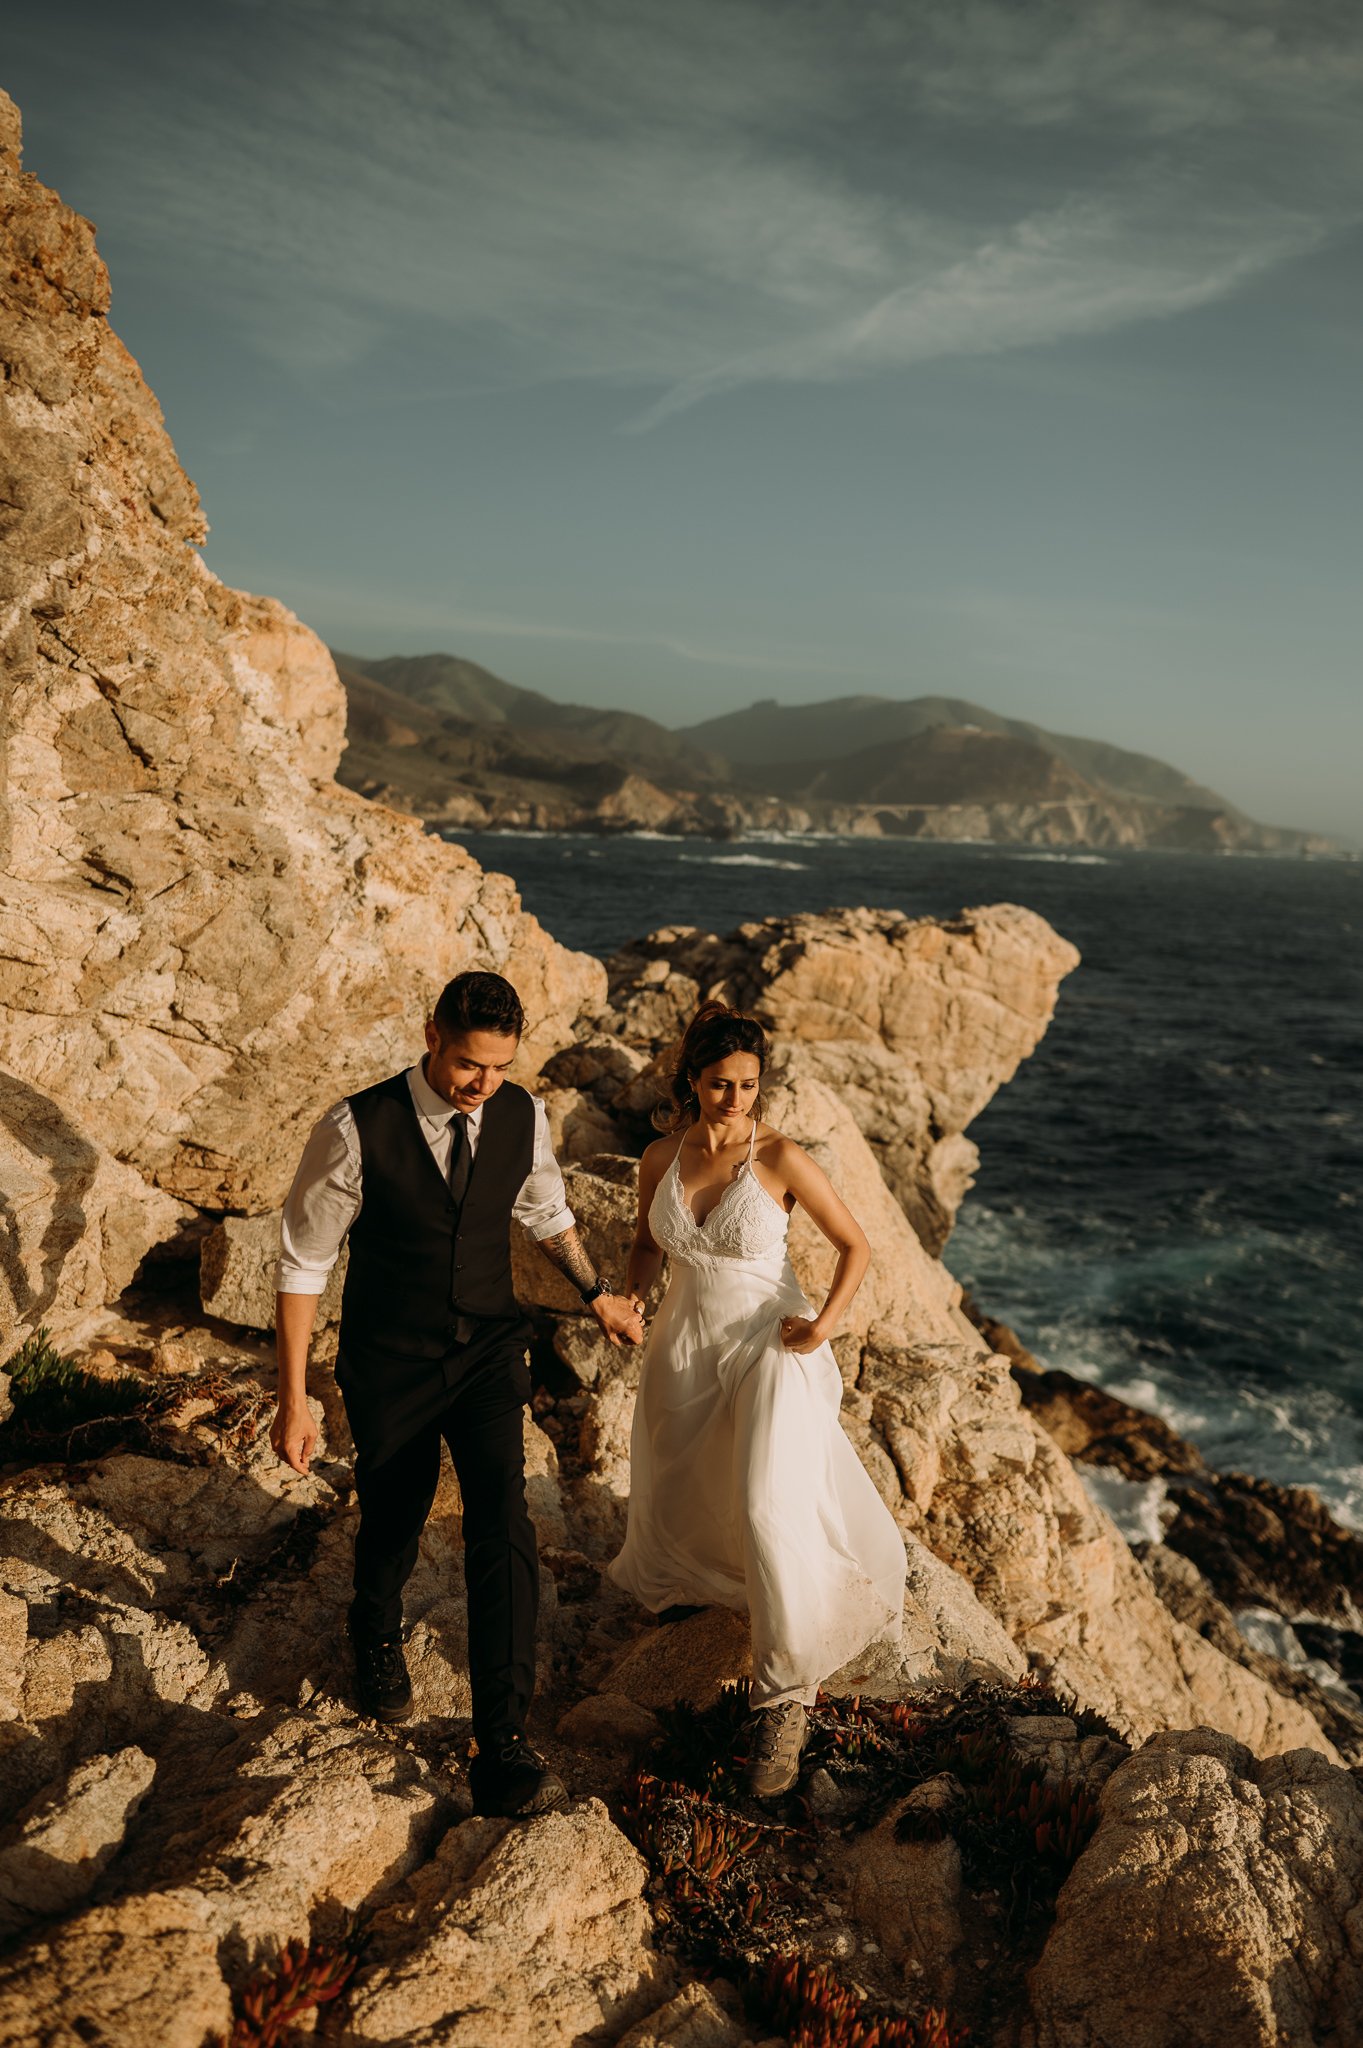 Newlyweds photography session couple walking cliffside Big Sur California